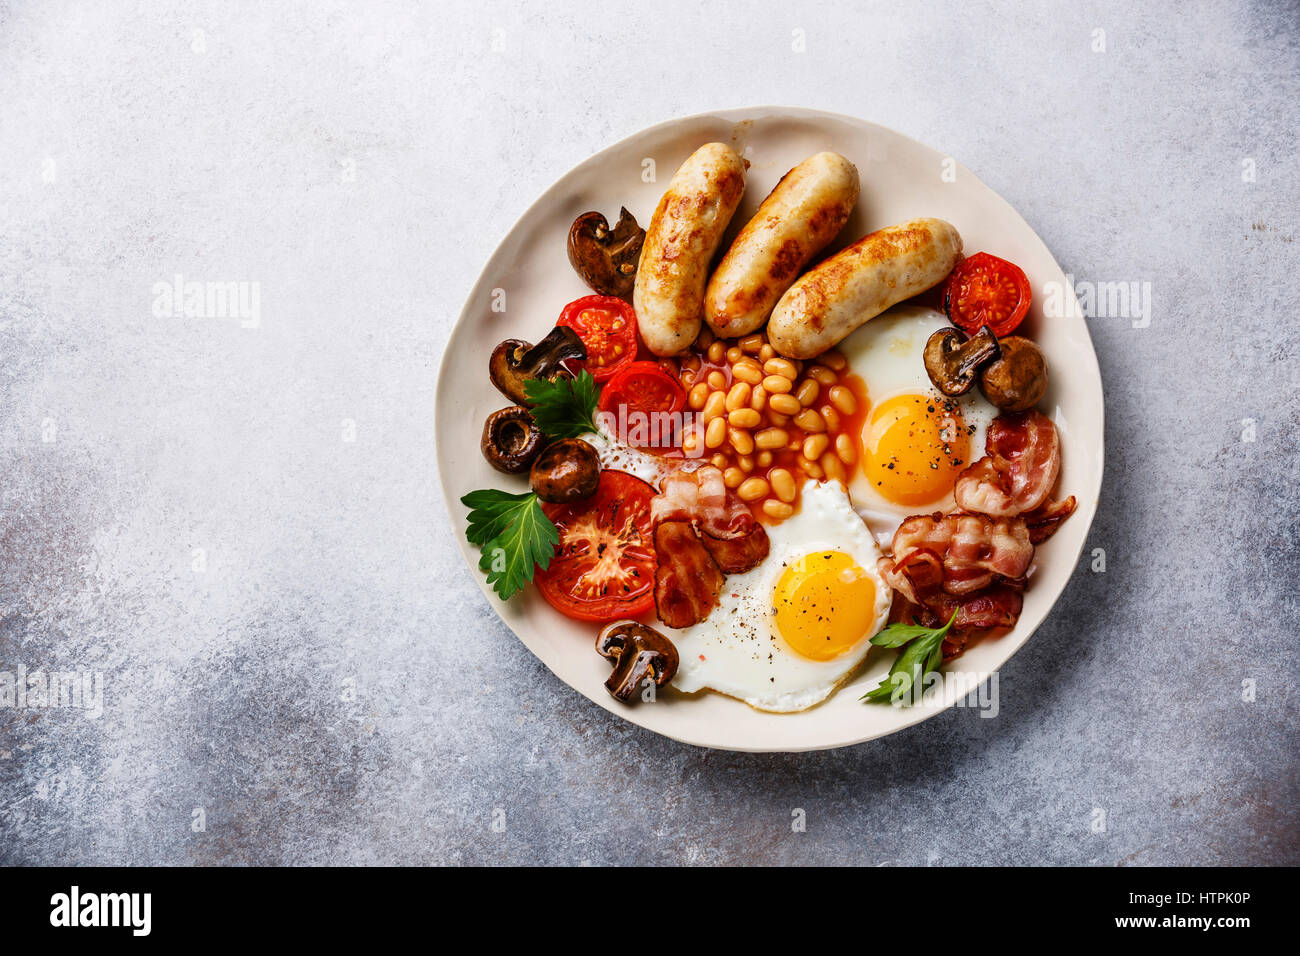 English breakfast with fried eggs, sausages, bacon, beans and bread toasts on plate on copy space background Stock Photo